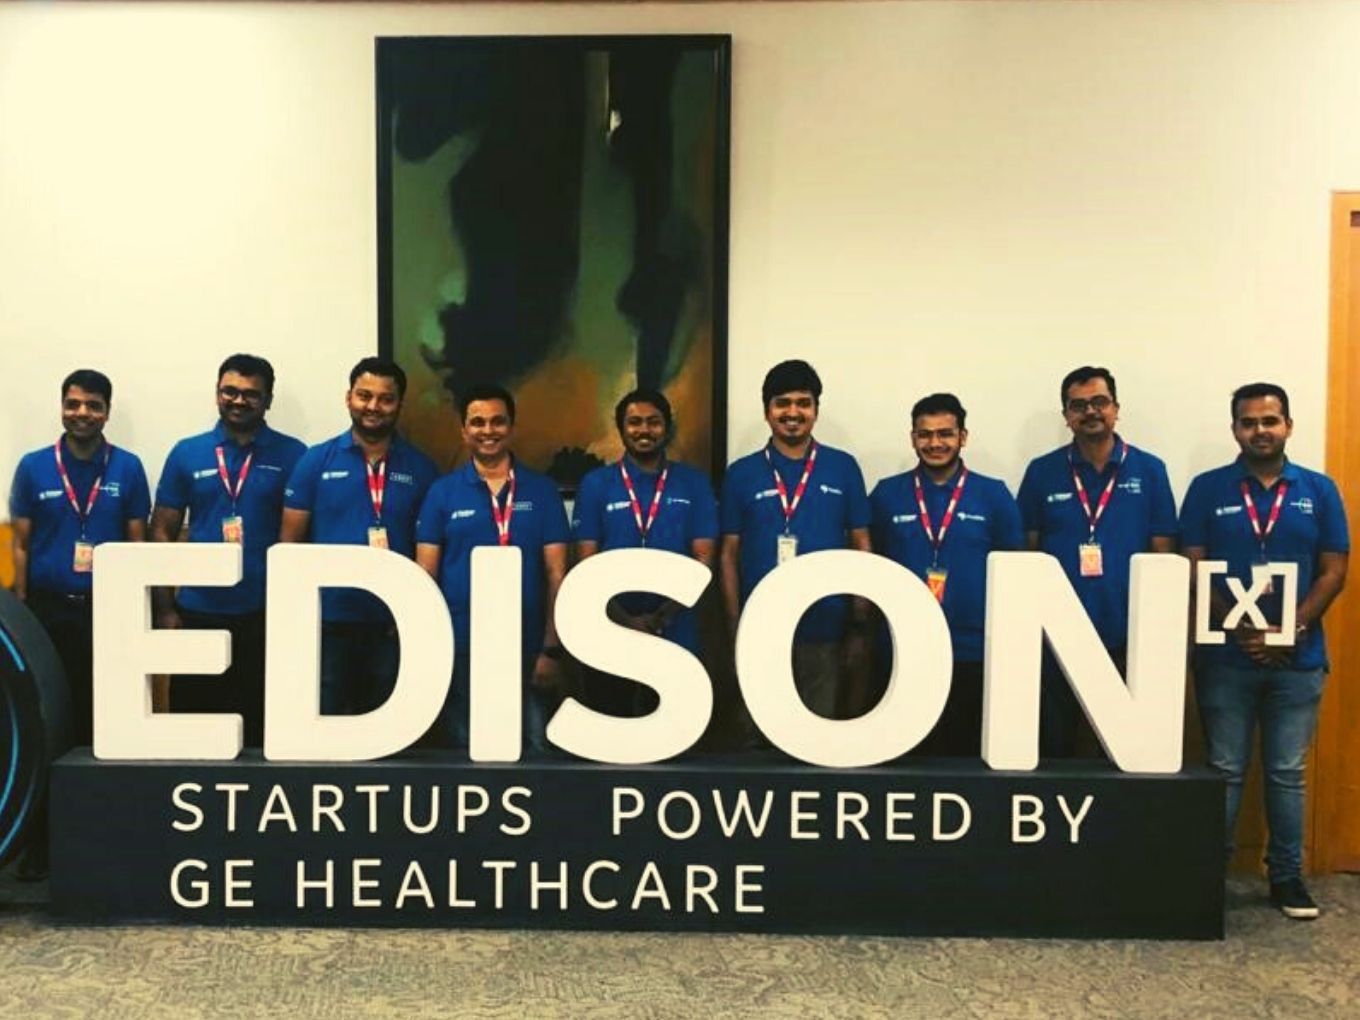 With Healthtech In The Spotlight, GE's Healthcare Accelerator Looks To Take Indian Startups Global